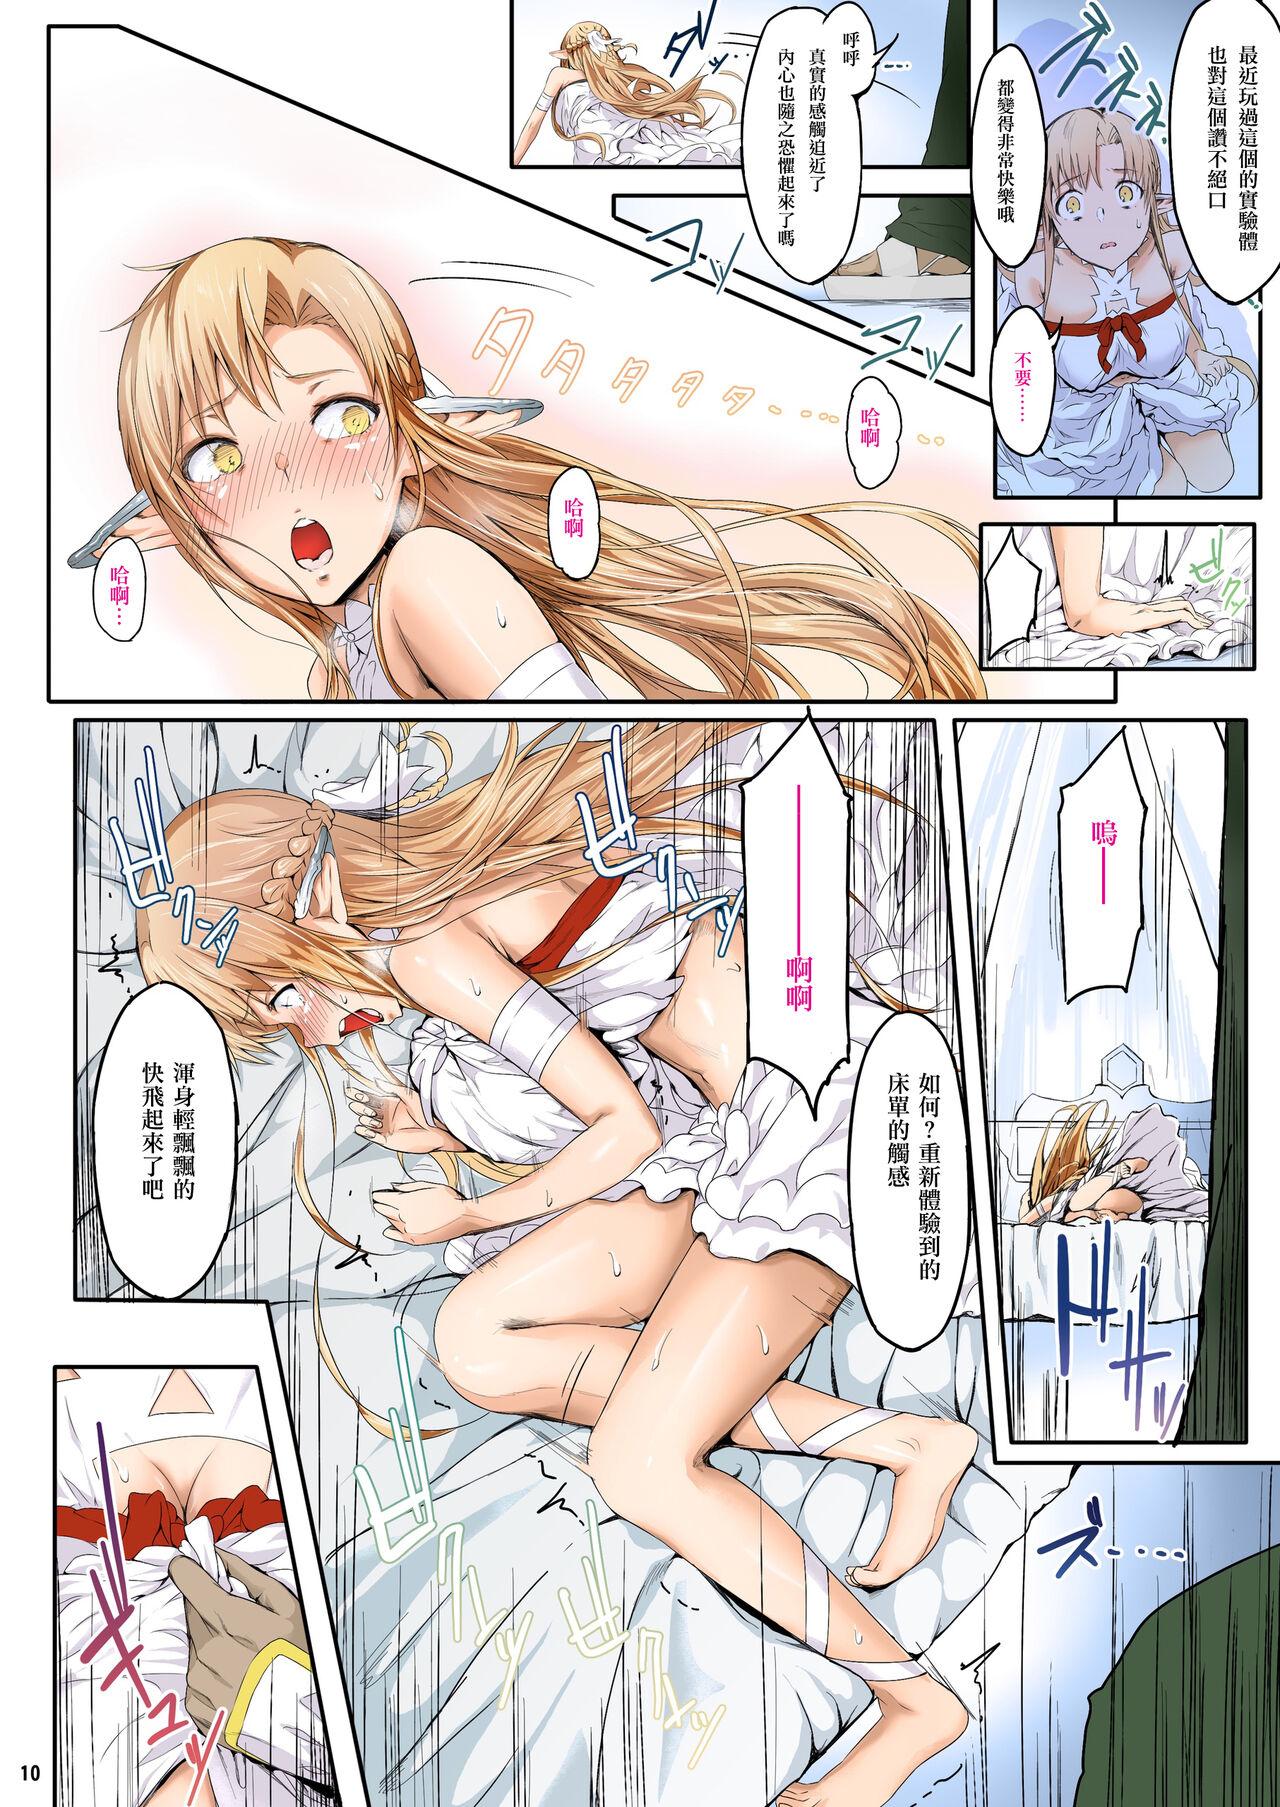 Reversecowgirl Asunama Soushuuhen Full color edition - Sword art online Skinny - Page 9